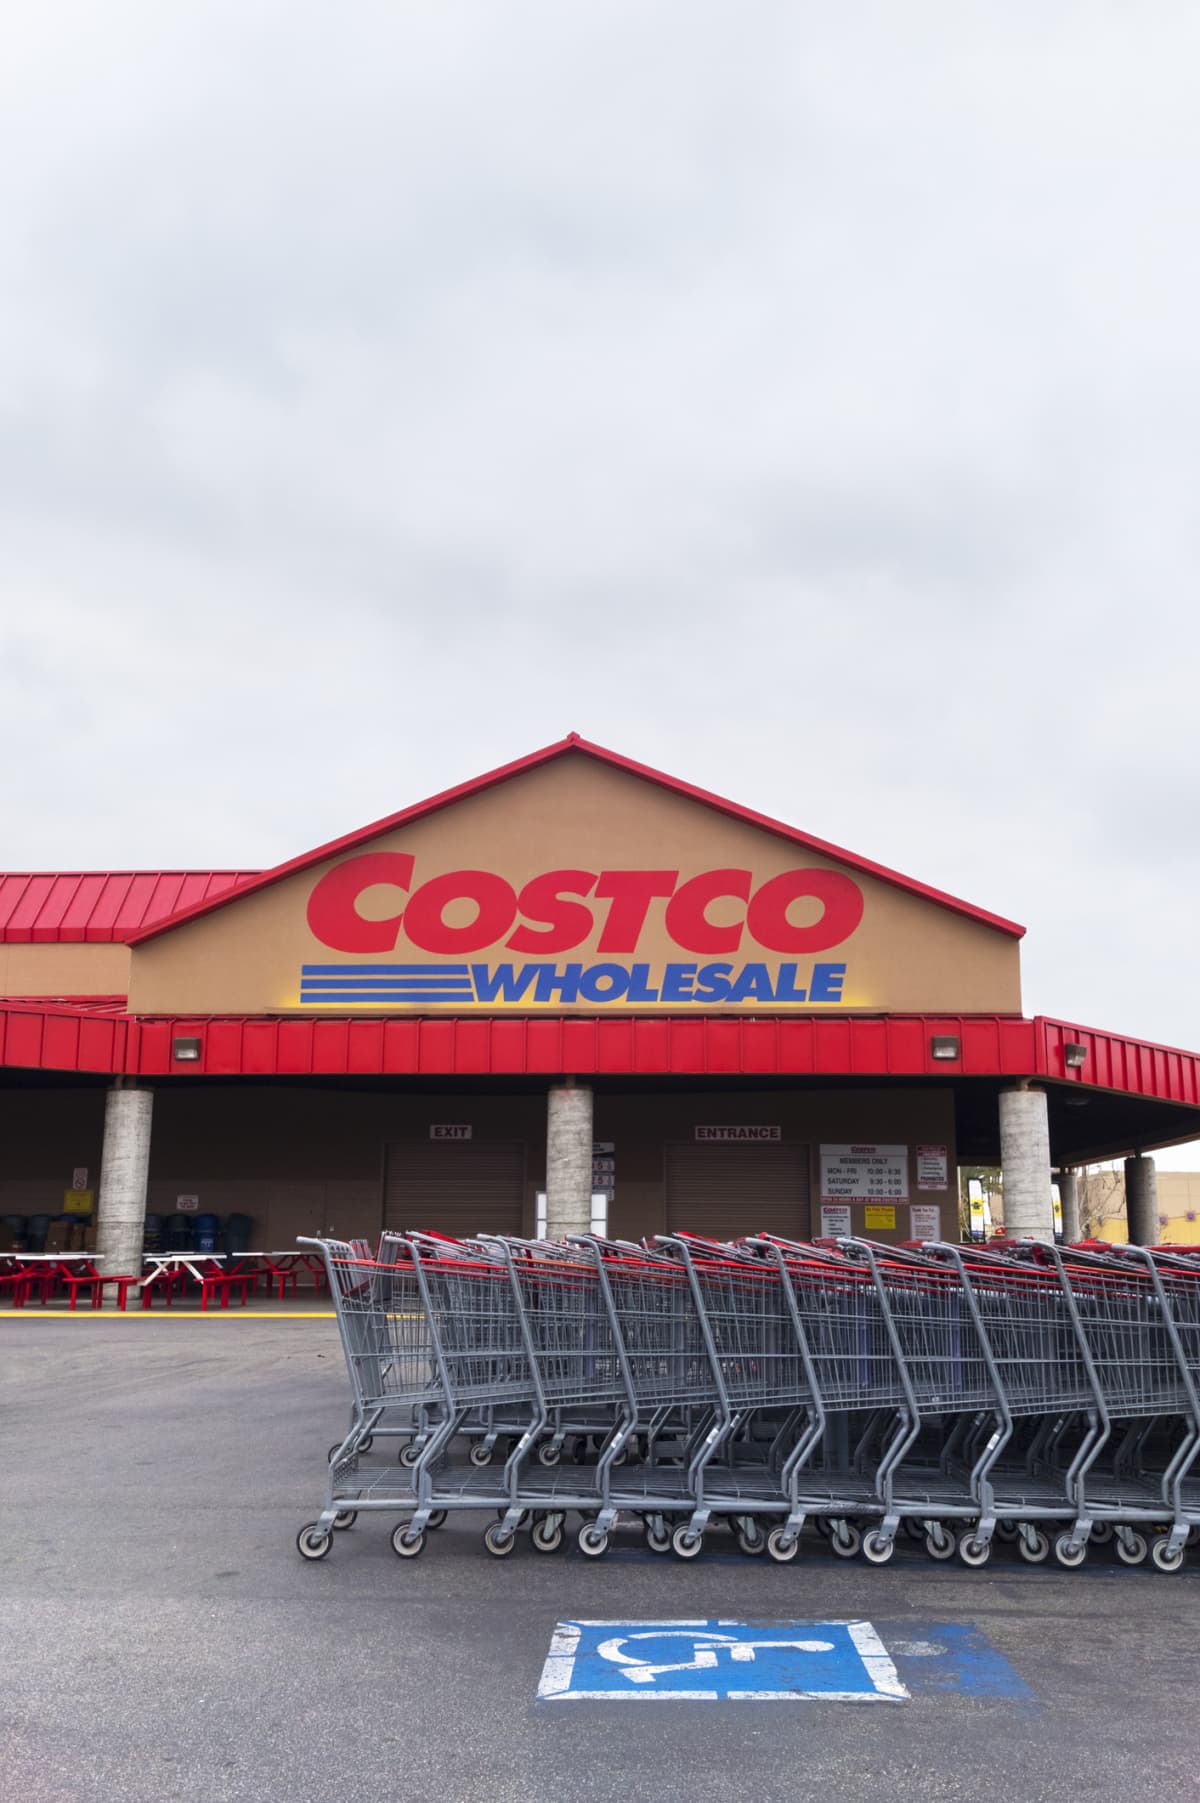 A Costco storefront with shopping carts in front of it